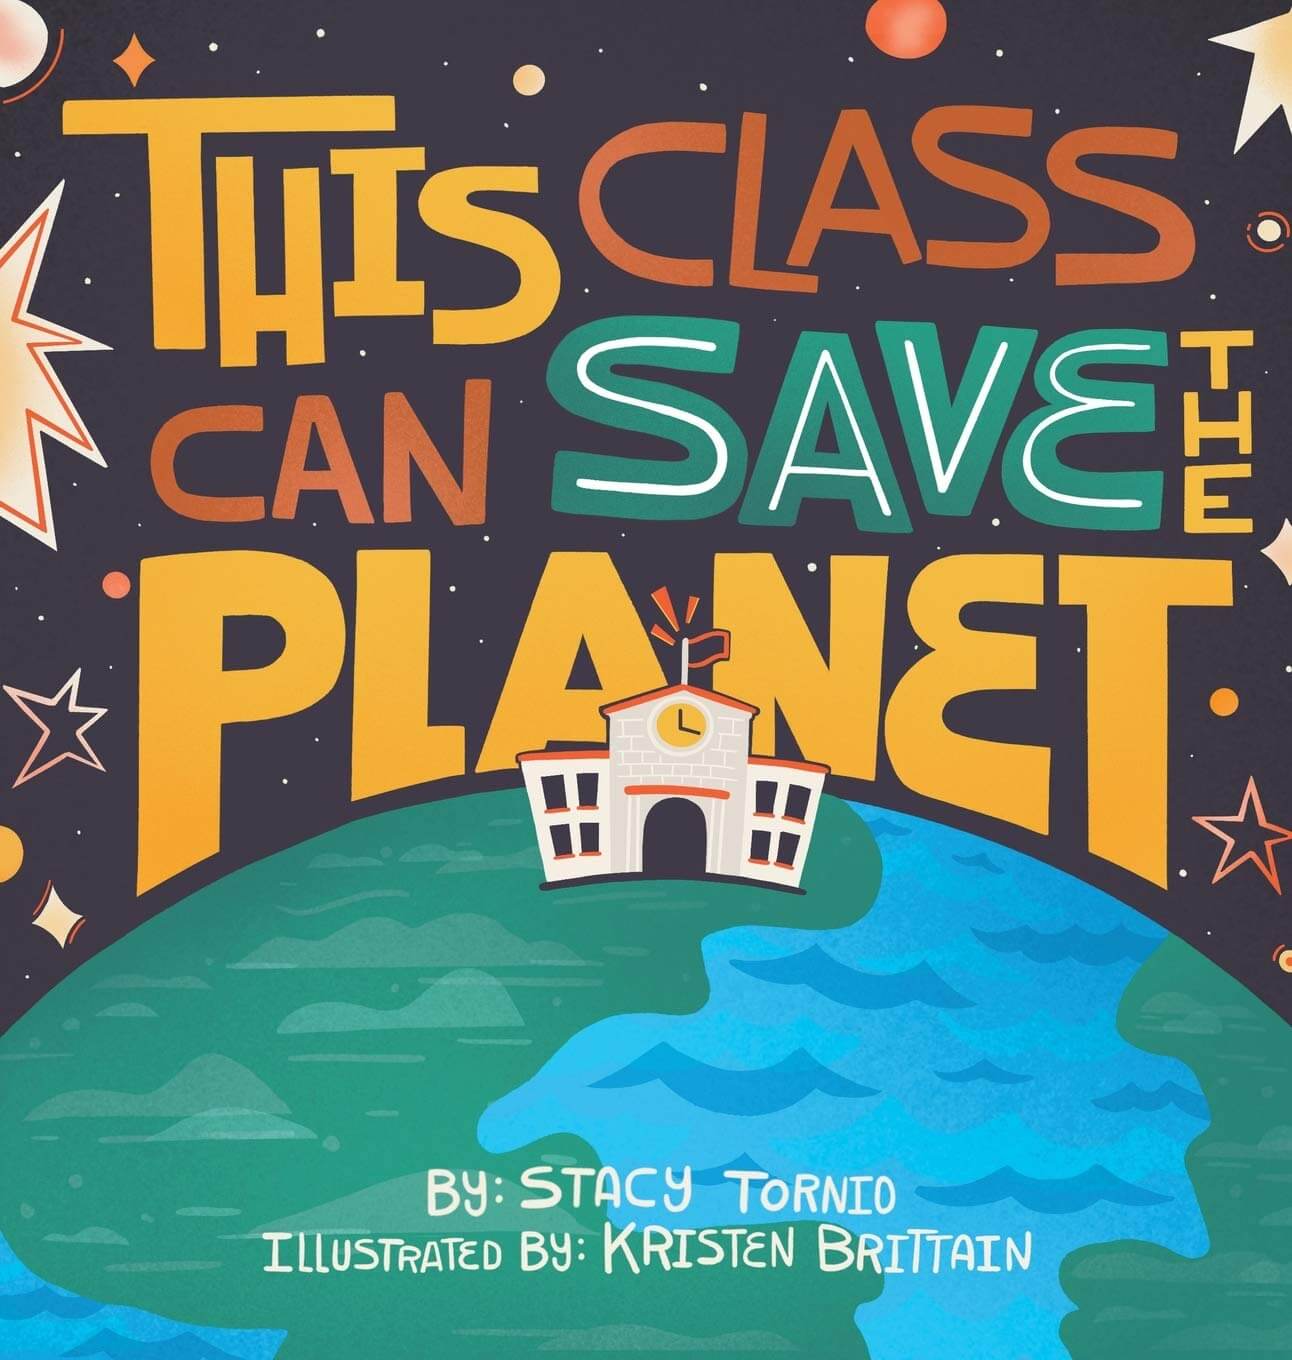 2. This class can save the planet by Stacie Torino 